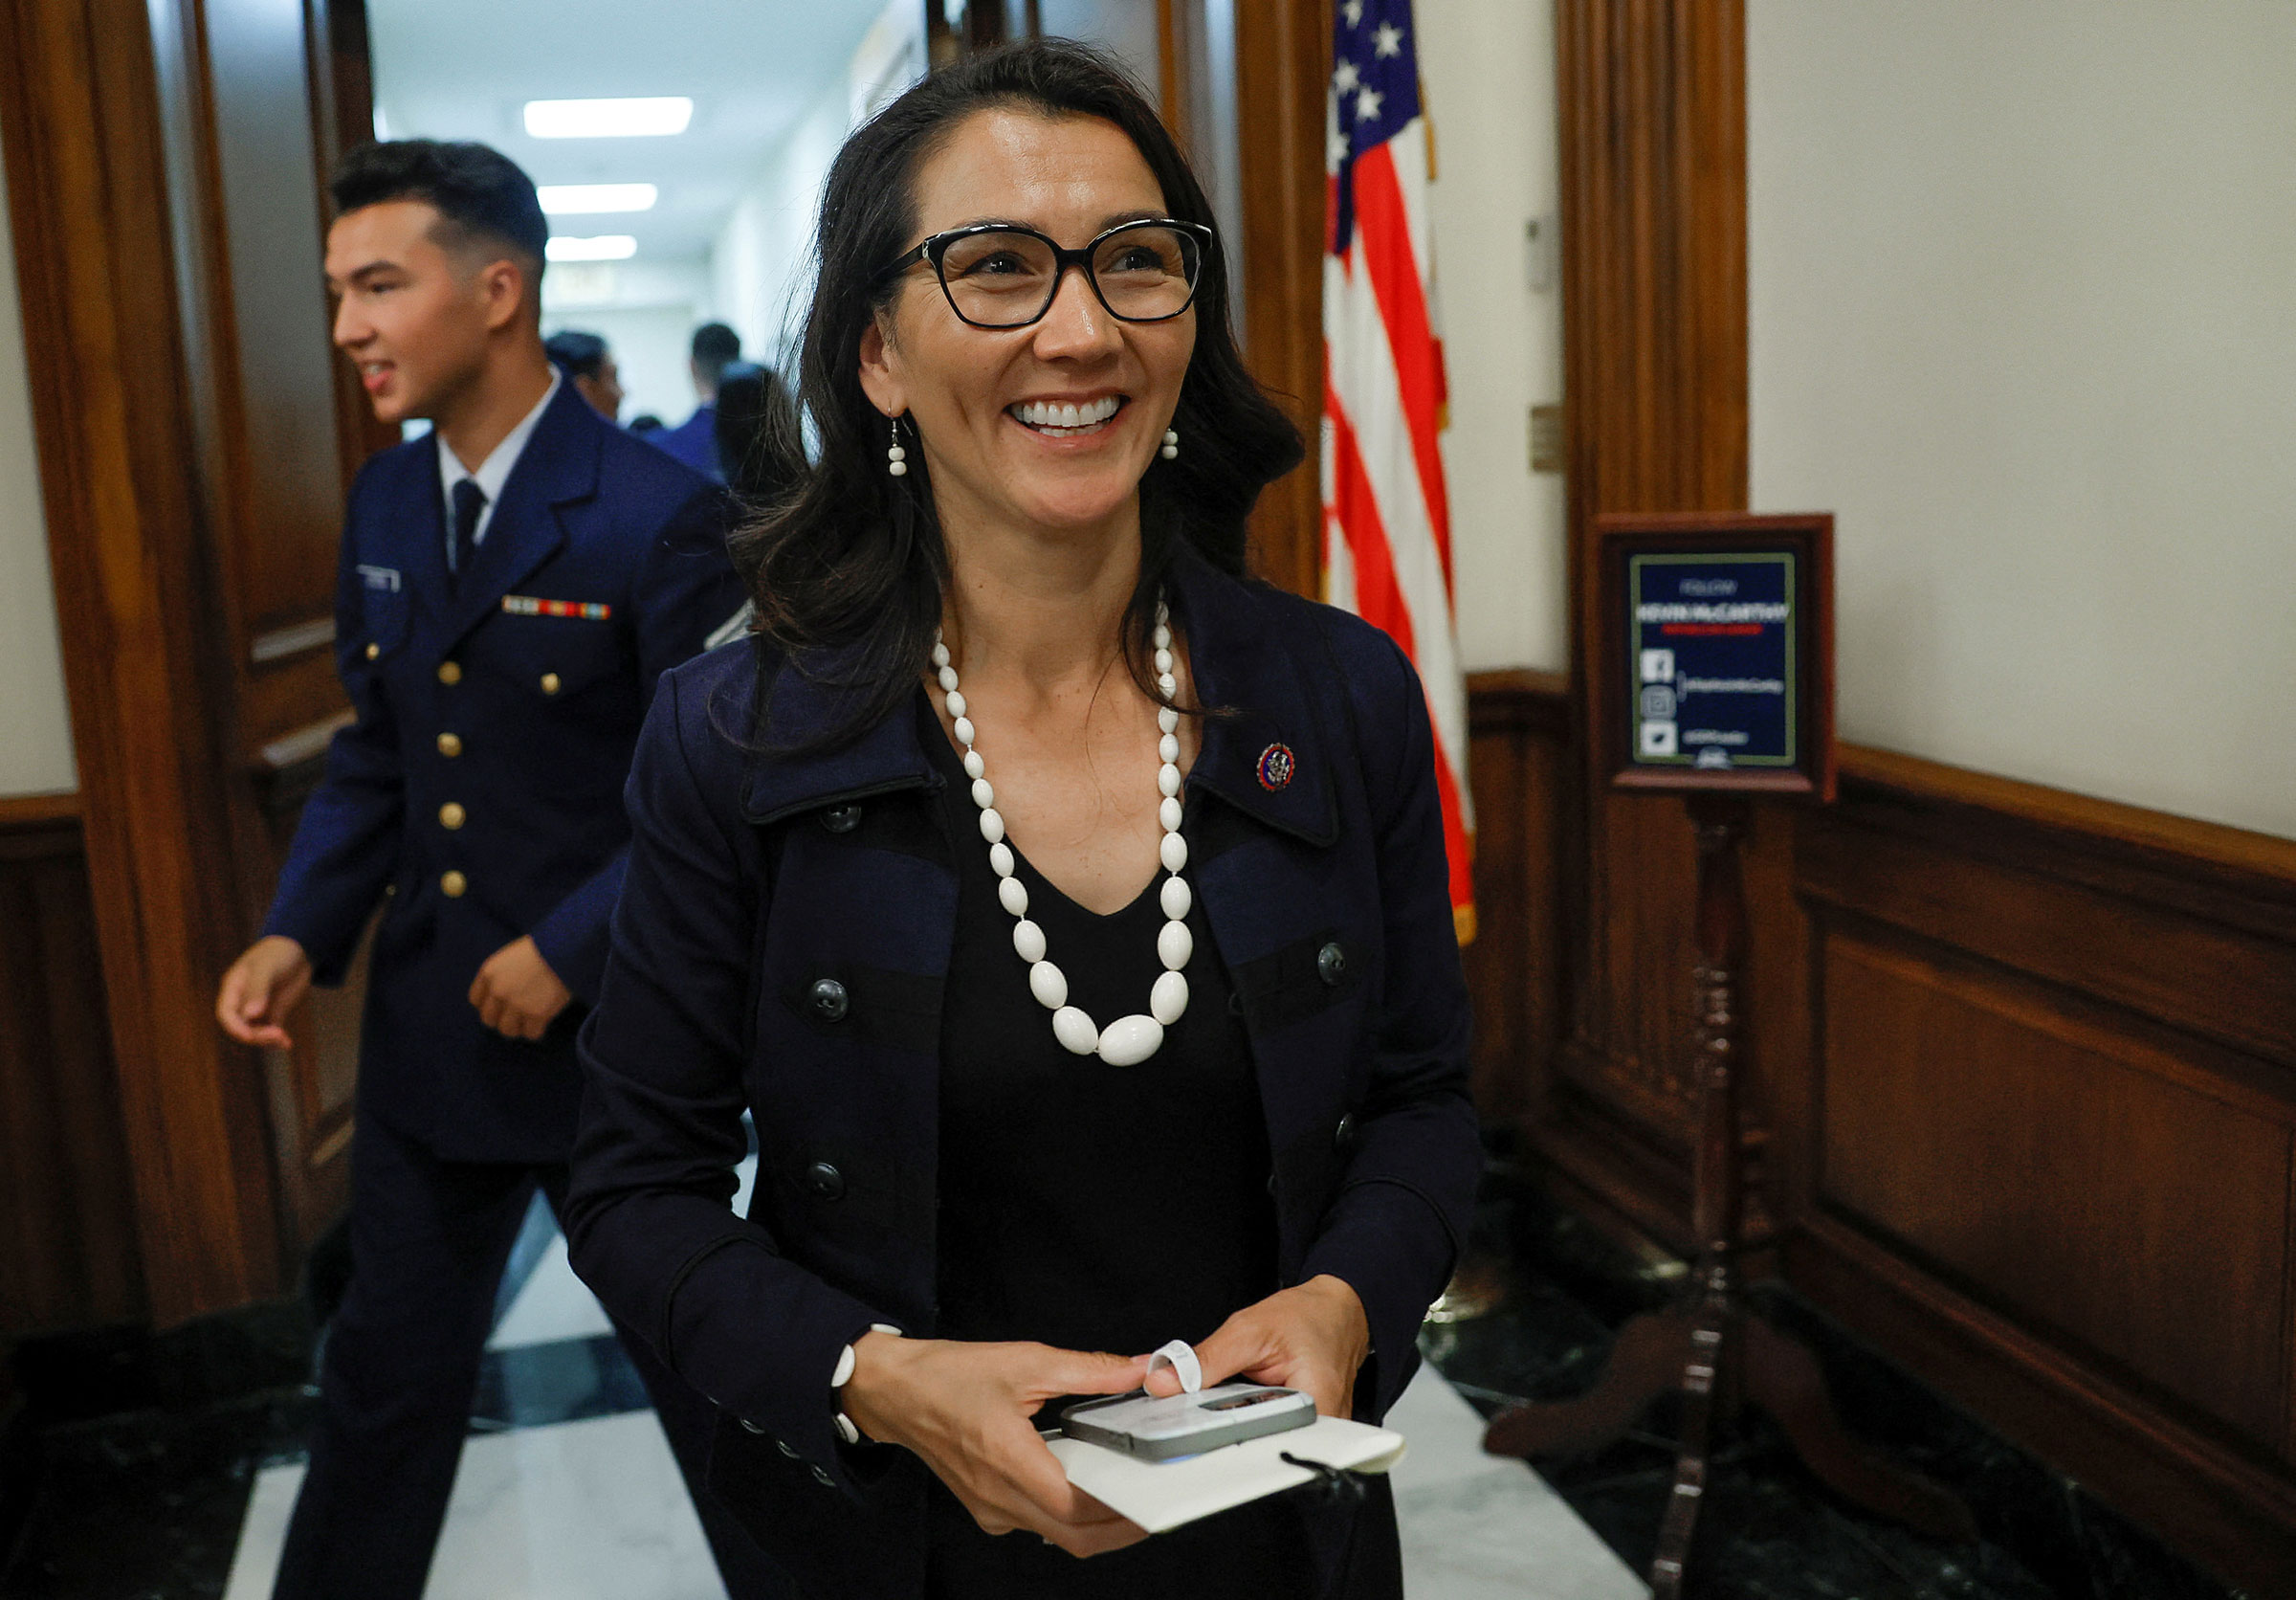 Representative Mary Peltola, the first Alaska Native to serve in Congress, smiles following her ceremonial swearing in at the United States Capitol in Washington, on Sept. 13, 2022. (Evelyn Hockstein—Reuters)